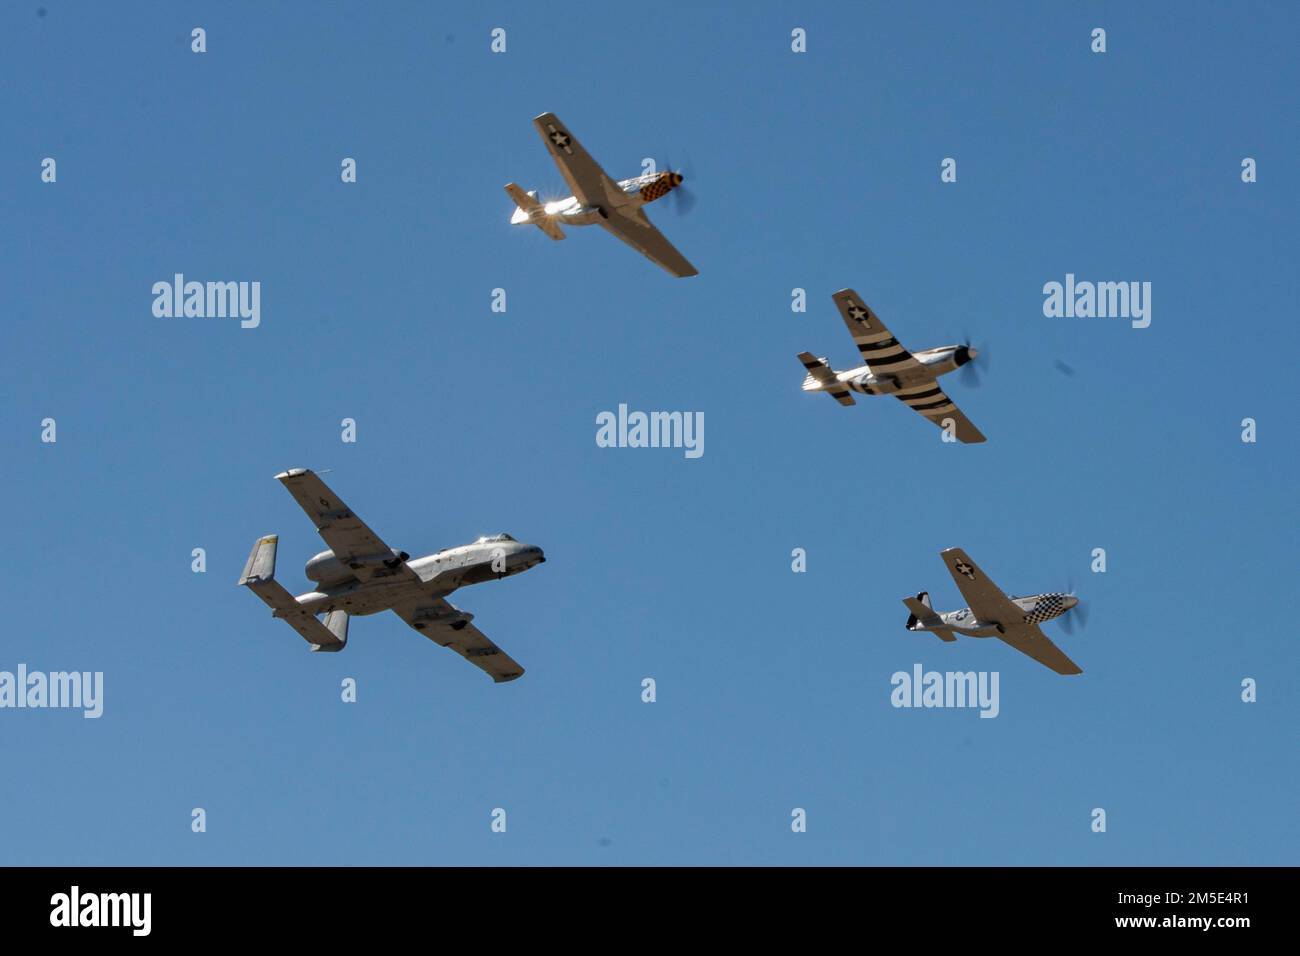 U.S. Air Force Maj. Haden 'Gator' Fullum, A-10 Thunderbolt II Demonstration Team pilot and commander, flies in a four-ship formation alongside 3 P-51 Mustangs during Heritage Flight Training Course at Davis-Monthan Air Force Base, Arizona, March 6, 2022. During the event, civilian warbird pilots and current Air Force demonstration pilots trained together ahead of the 2022 air show season. Stock Photo